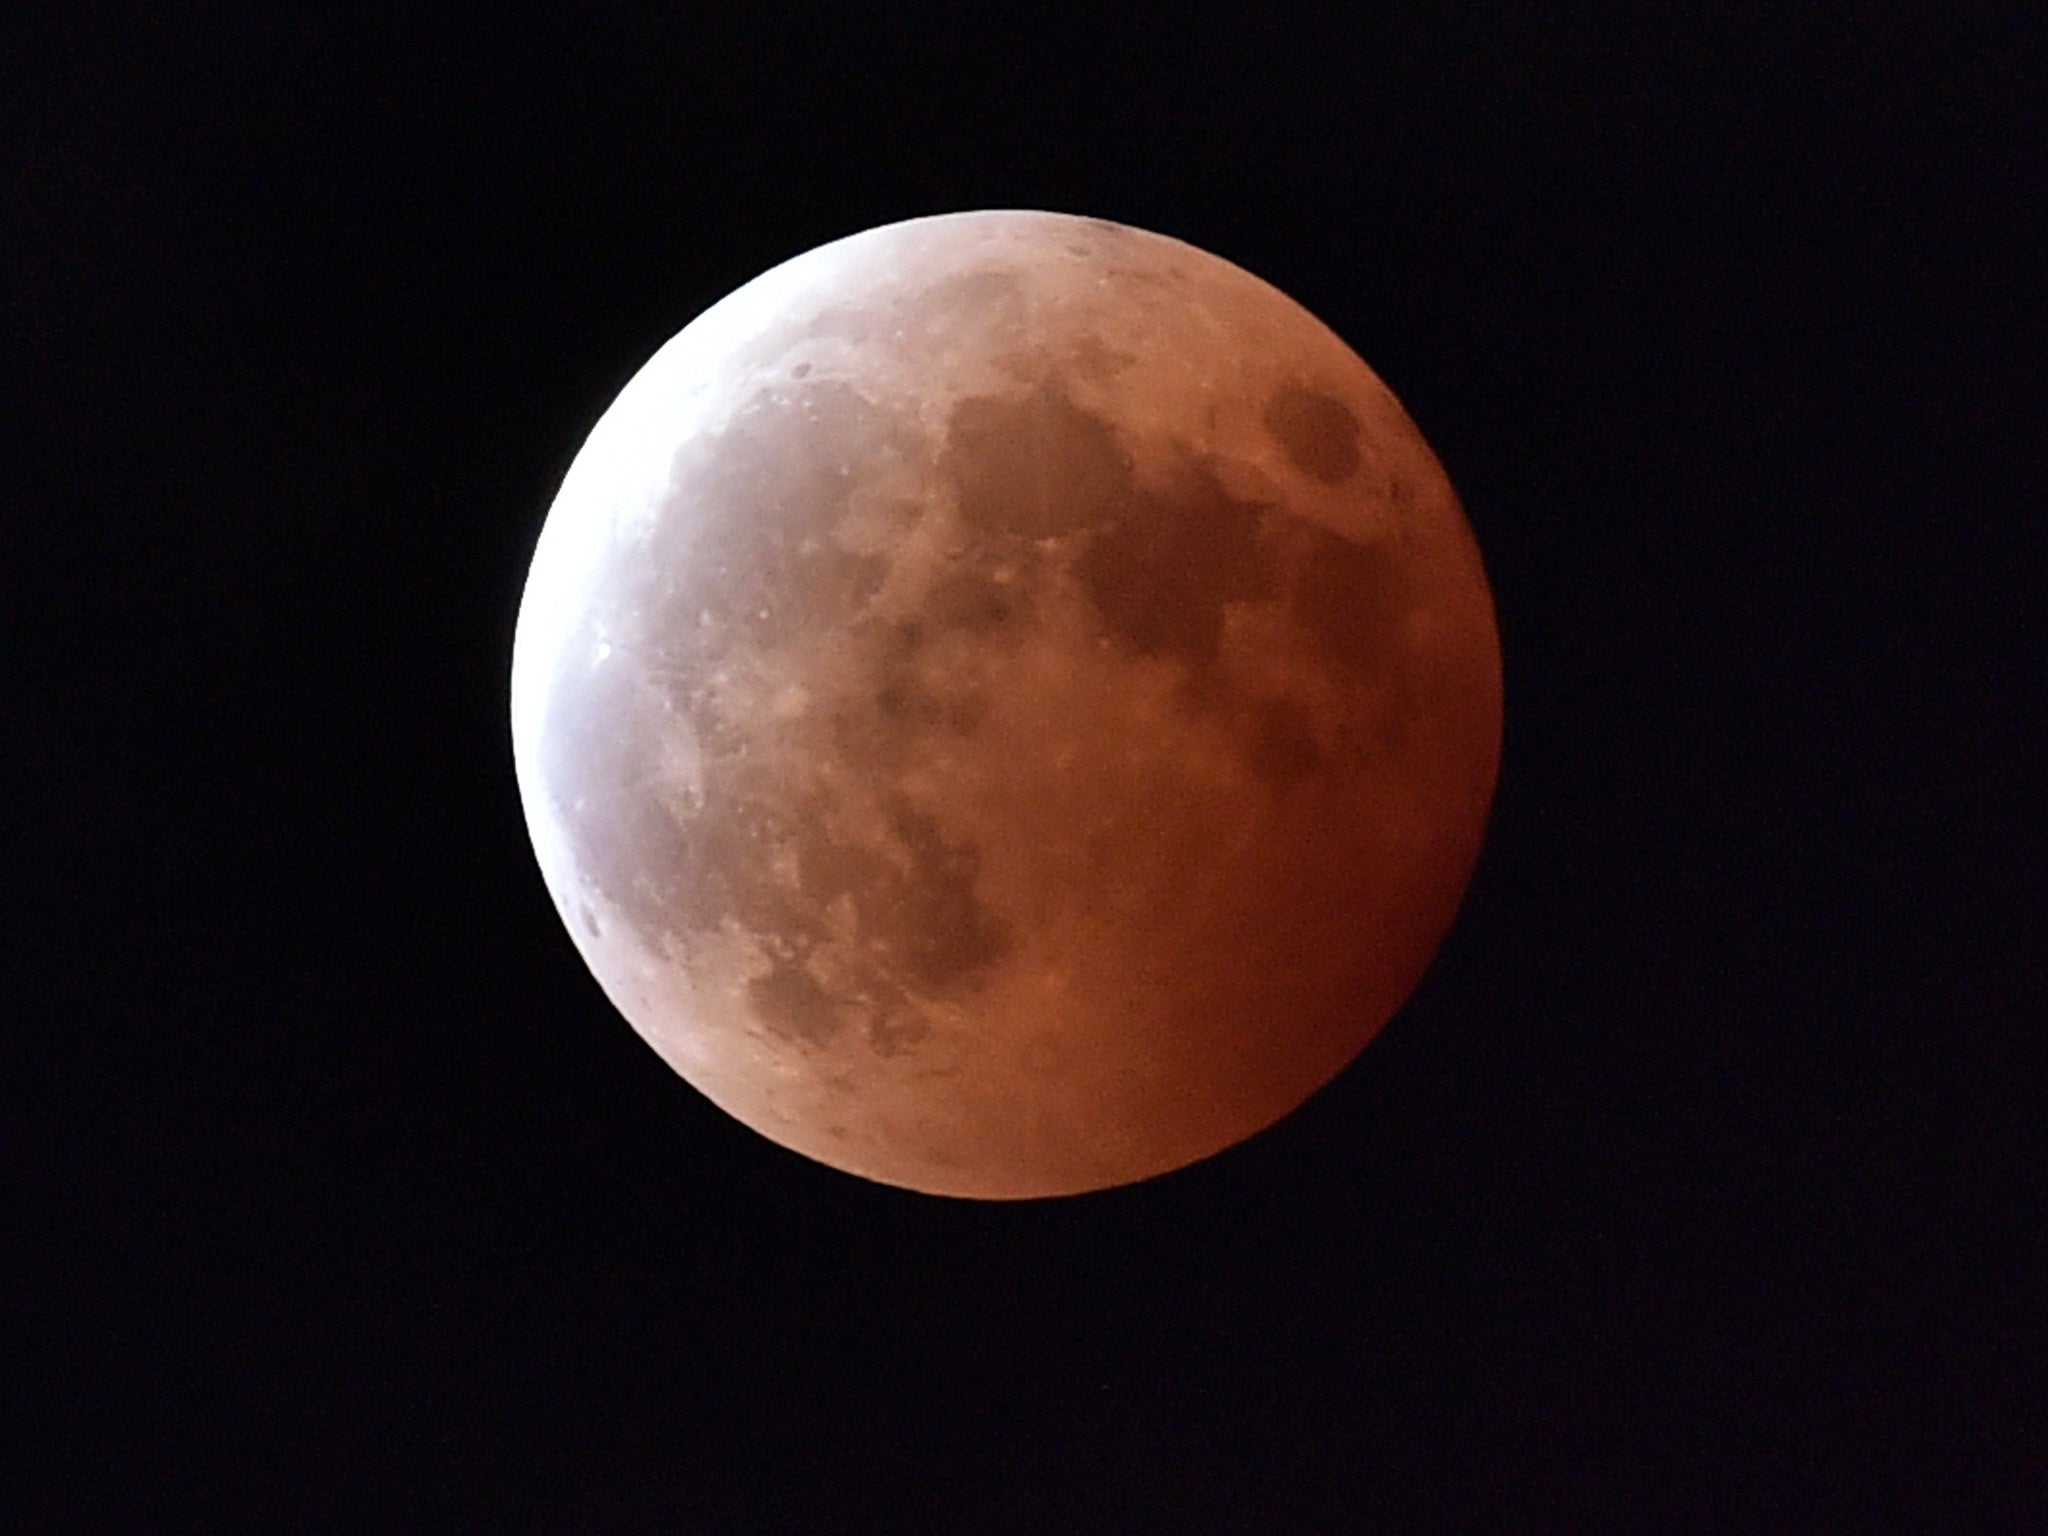 Watch the total lunar eclipse in a time-lapse video